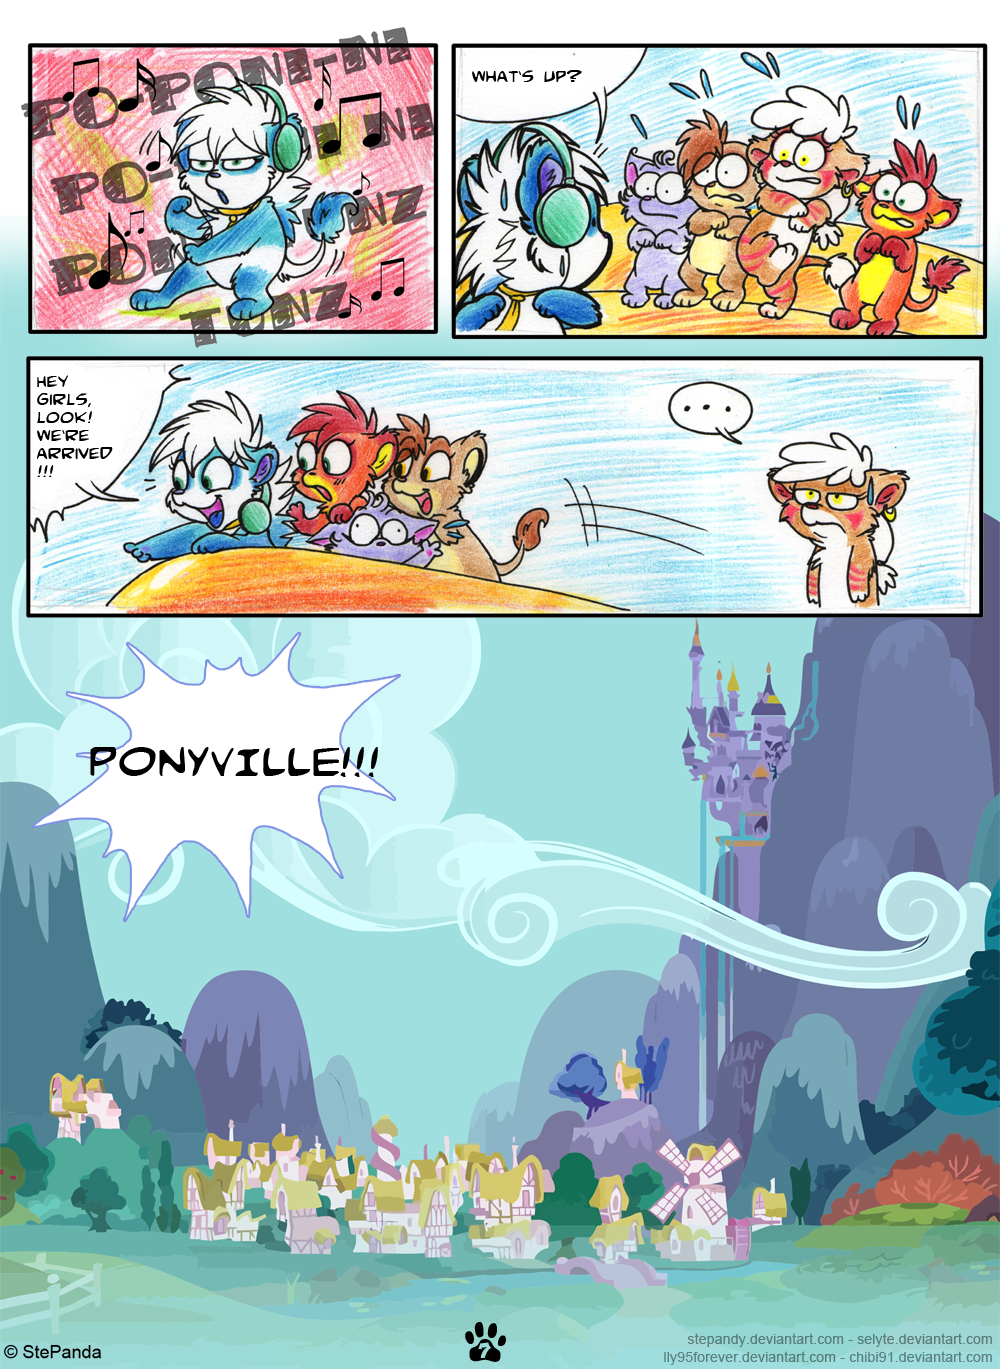 [Obrázek: equestria_world___page_7_by_stepandy-d58t61r.png]